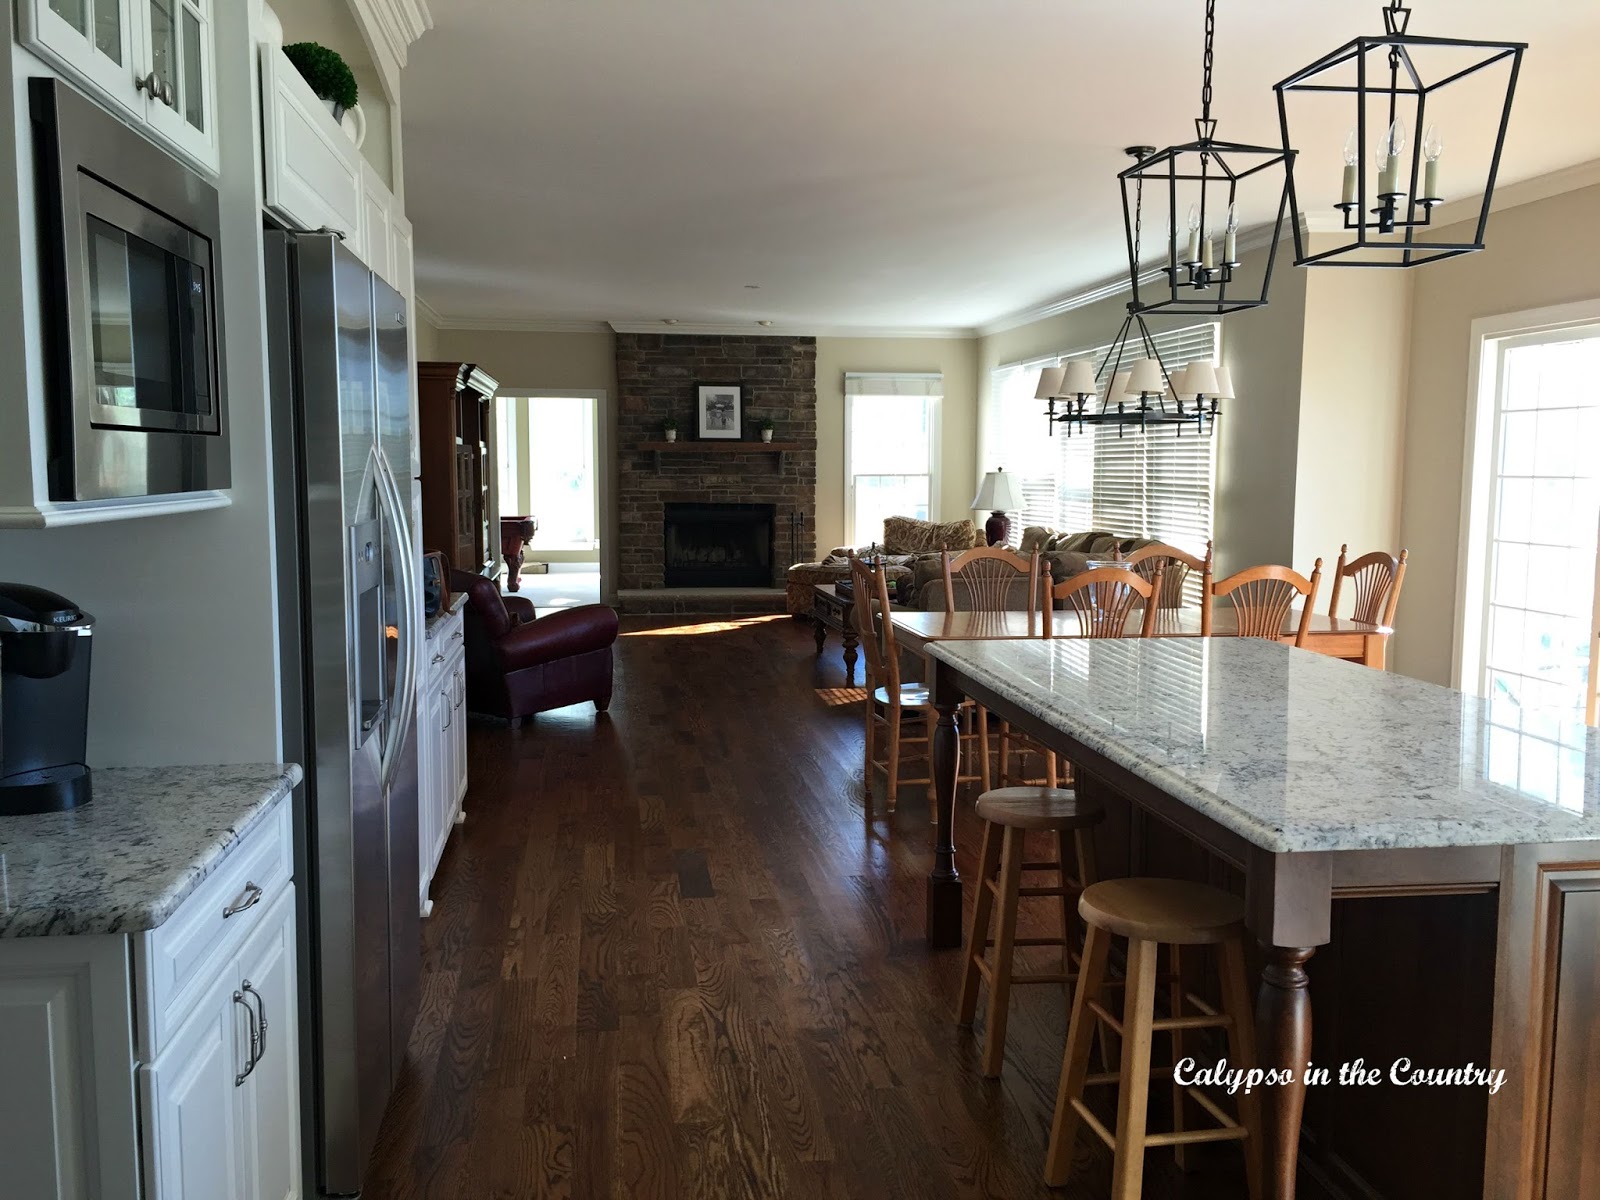 Kitchen Island and view to family room